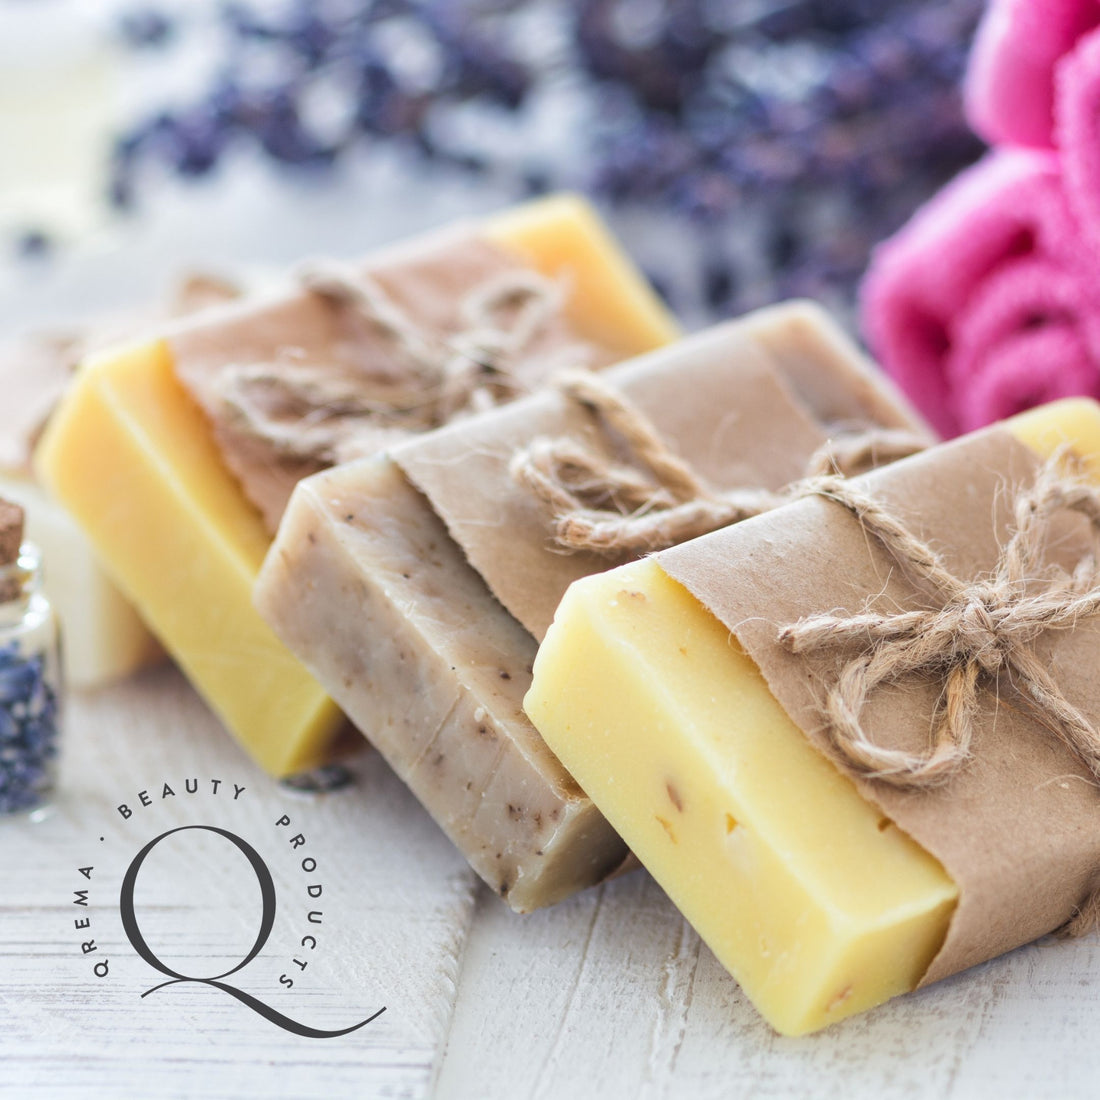 Homemade Soap: The Best Natural Homemade Soaps